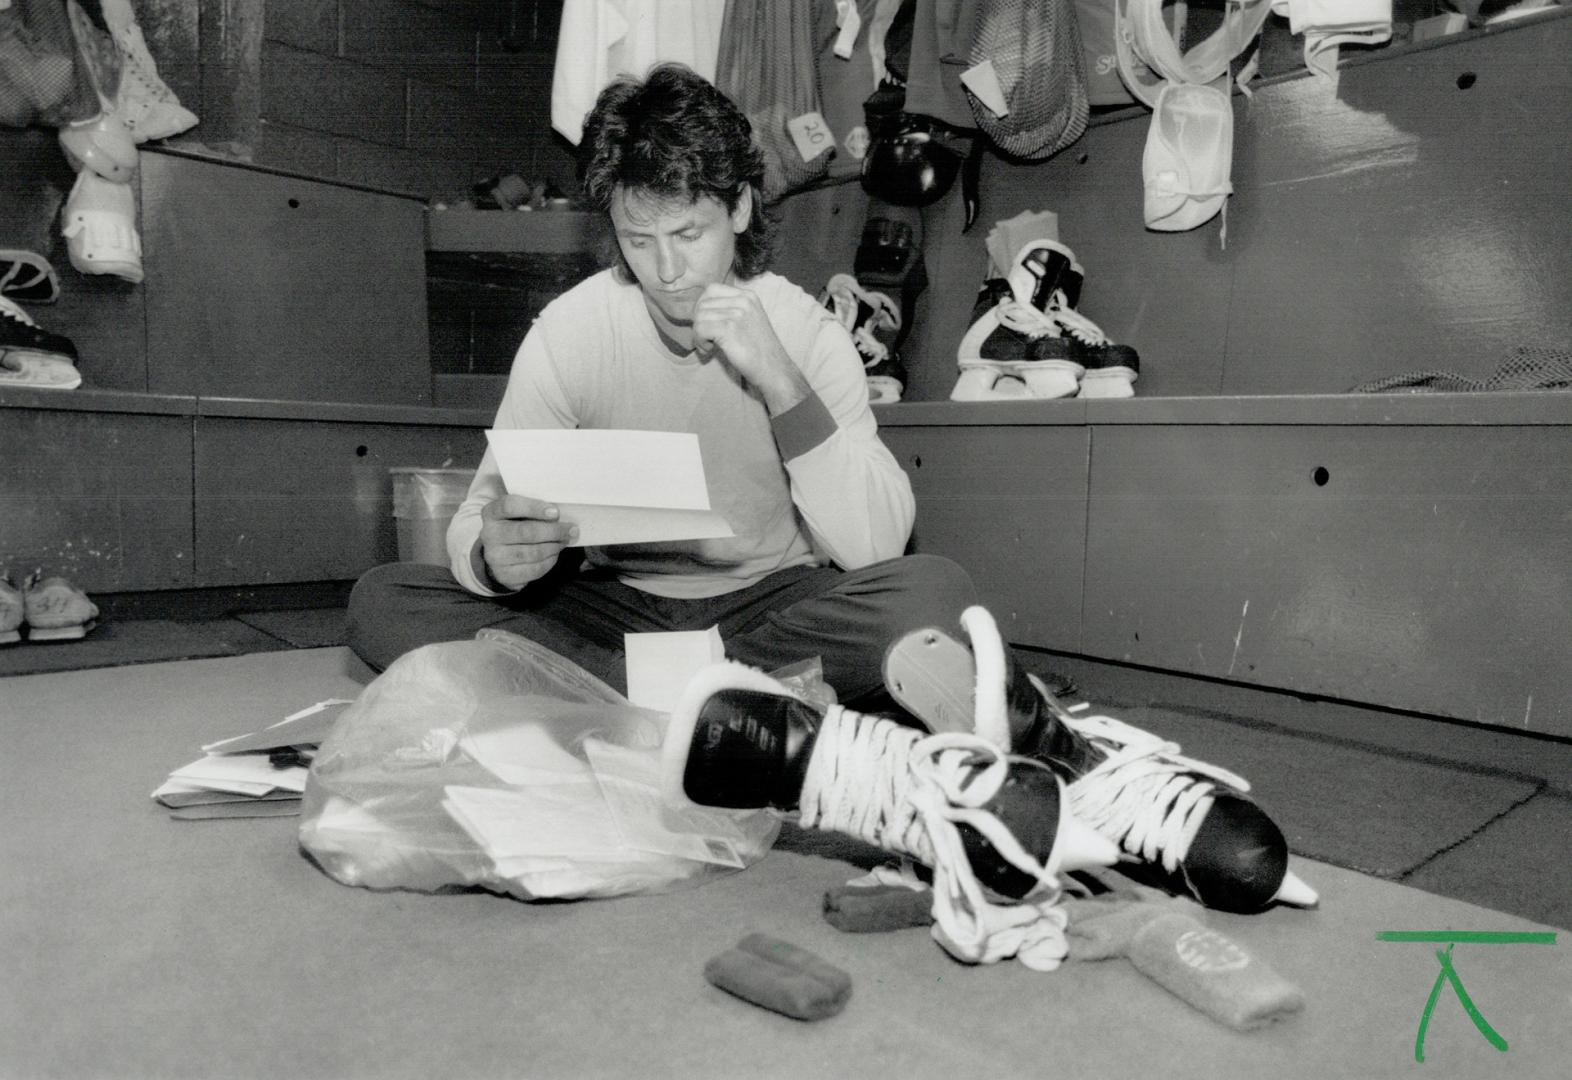 Fan mail: Maple Leafs centre Doug Gilmour catches up on some of his mail yesterday at the team's first practice since the NHL players went on strike